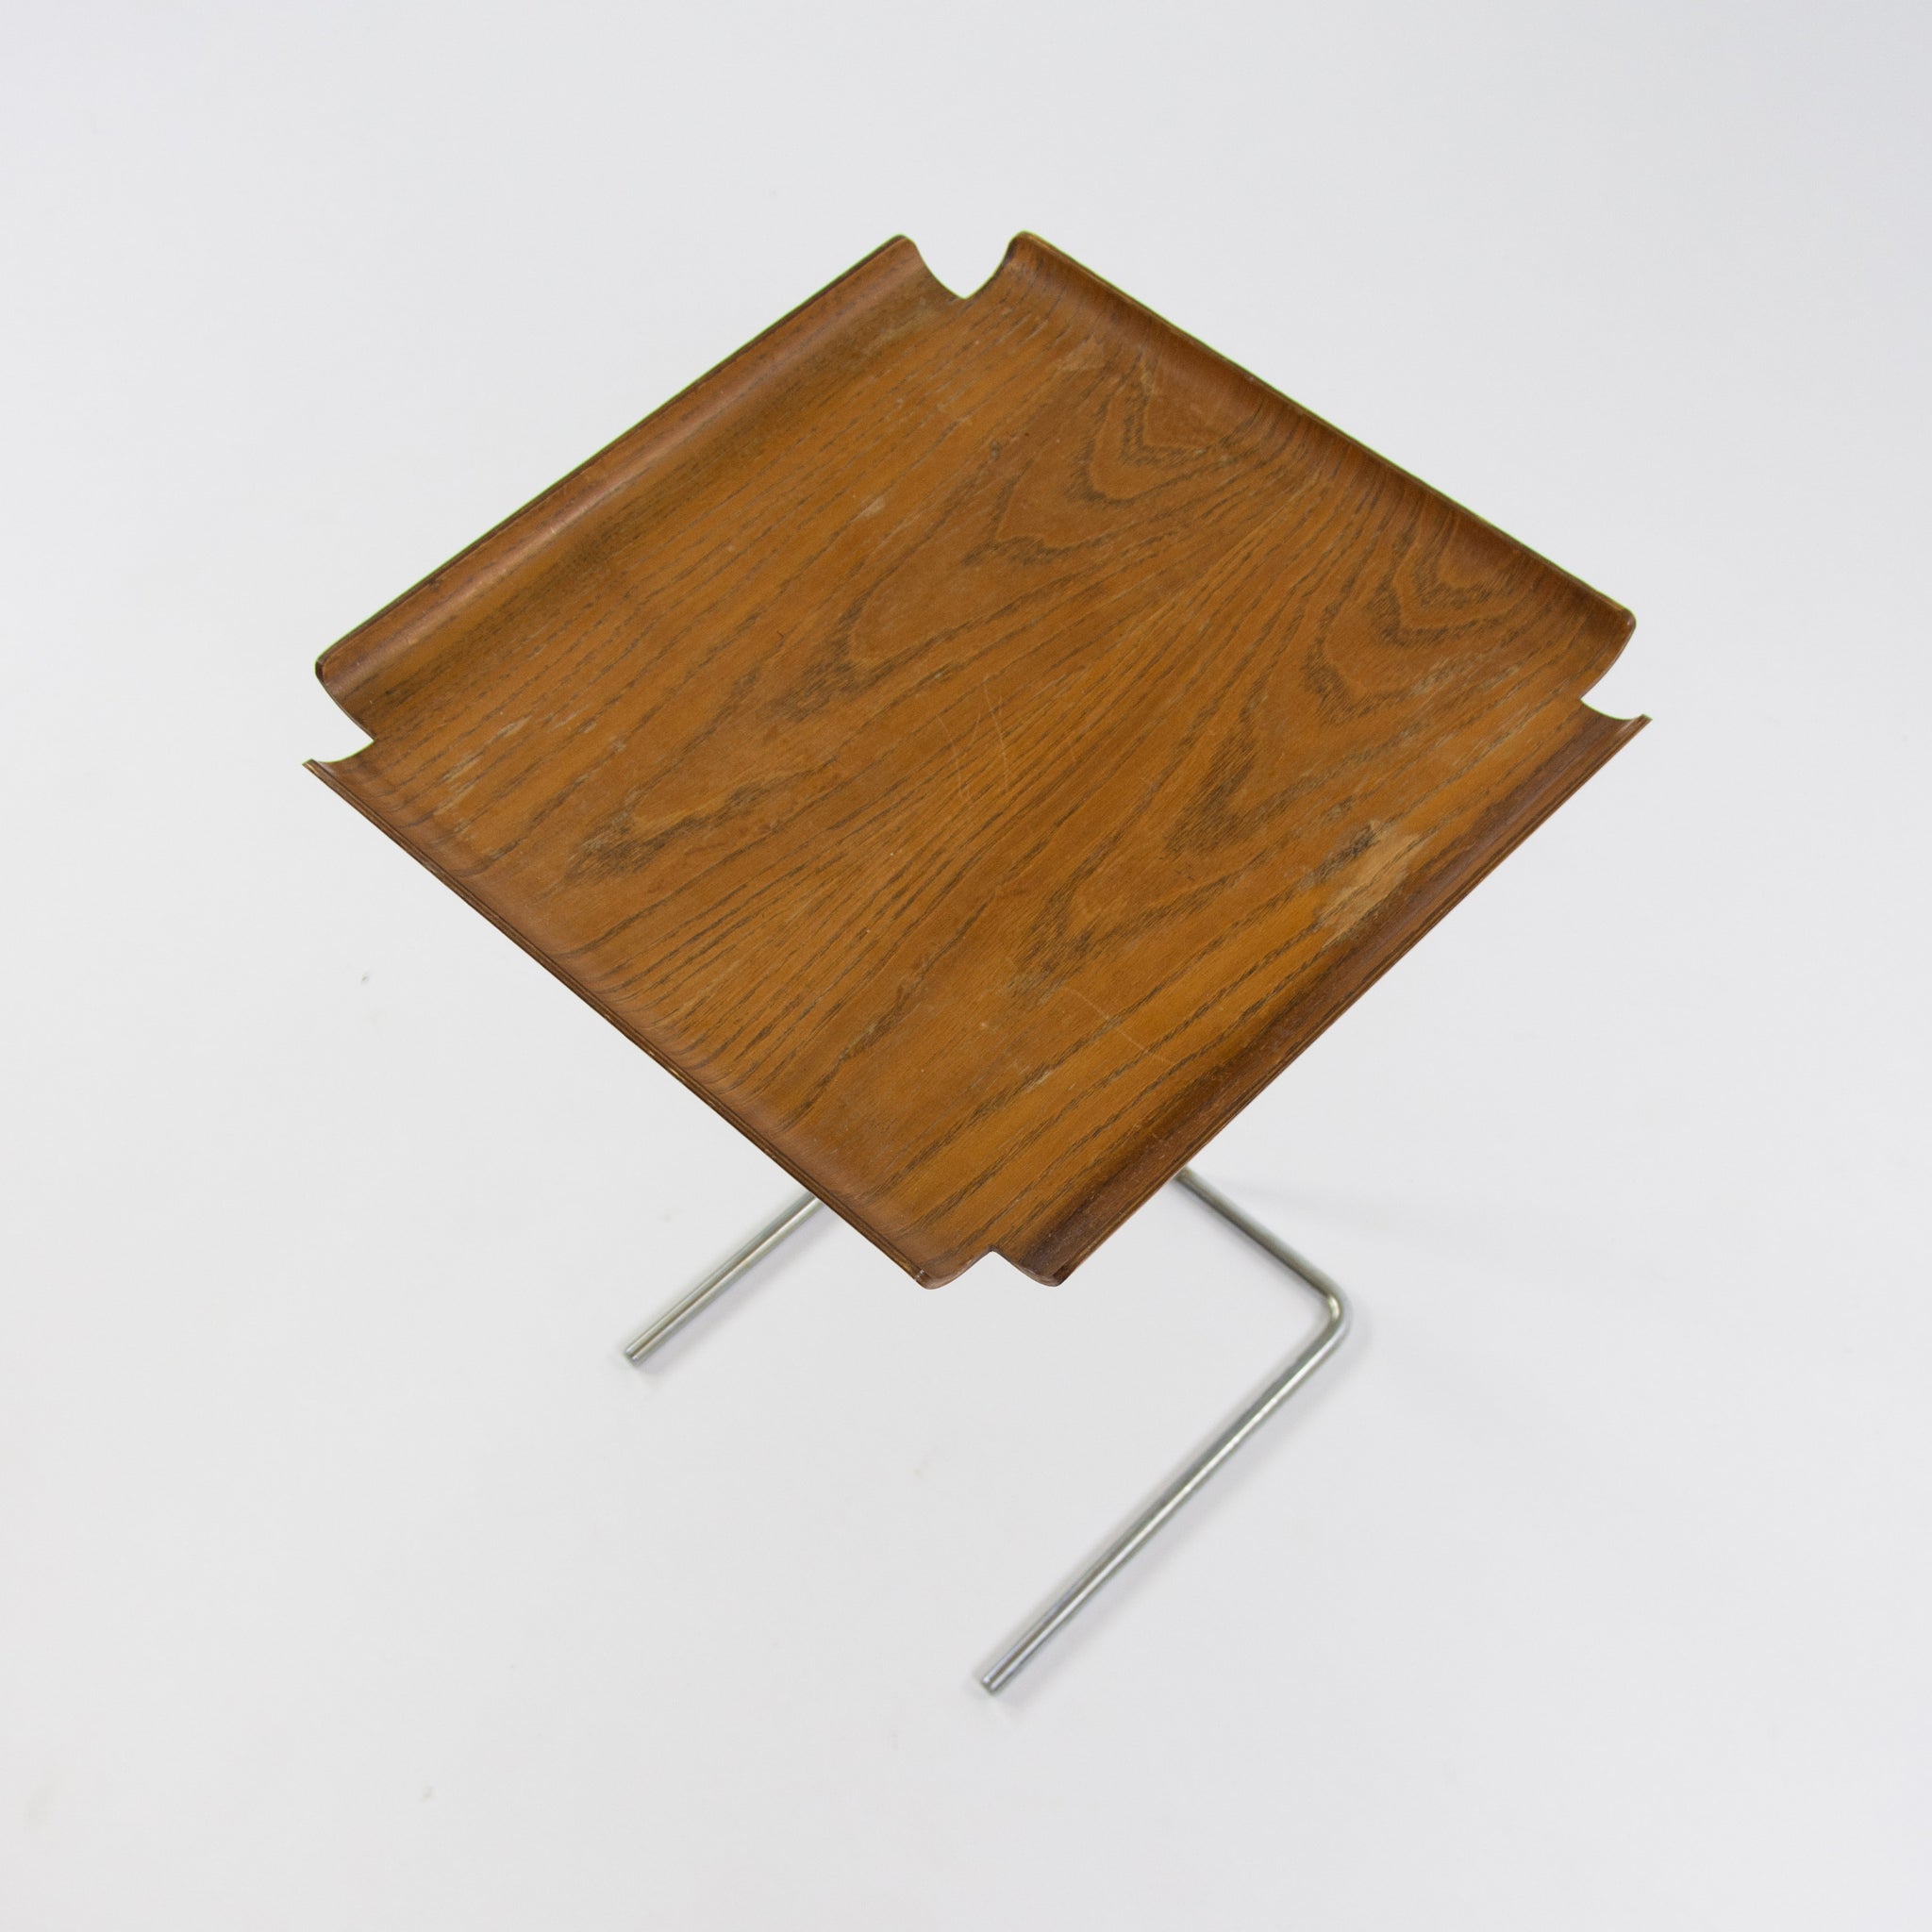 SOLD 1950's Original George Nelson & Associates Herman Miller 4950 Tray Side Table